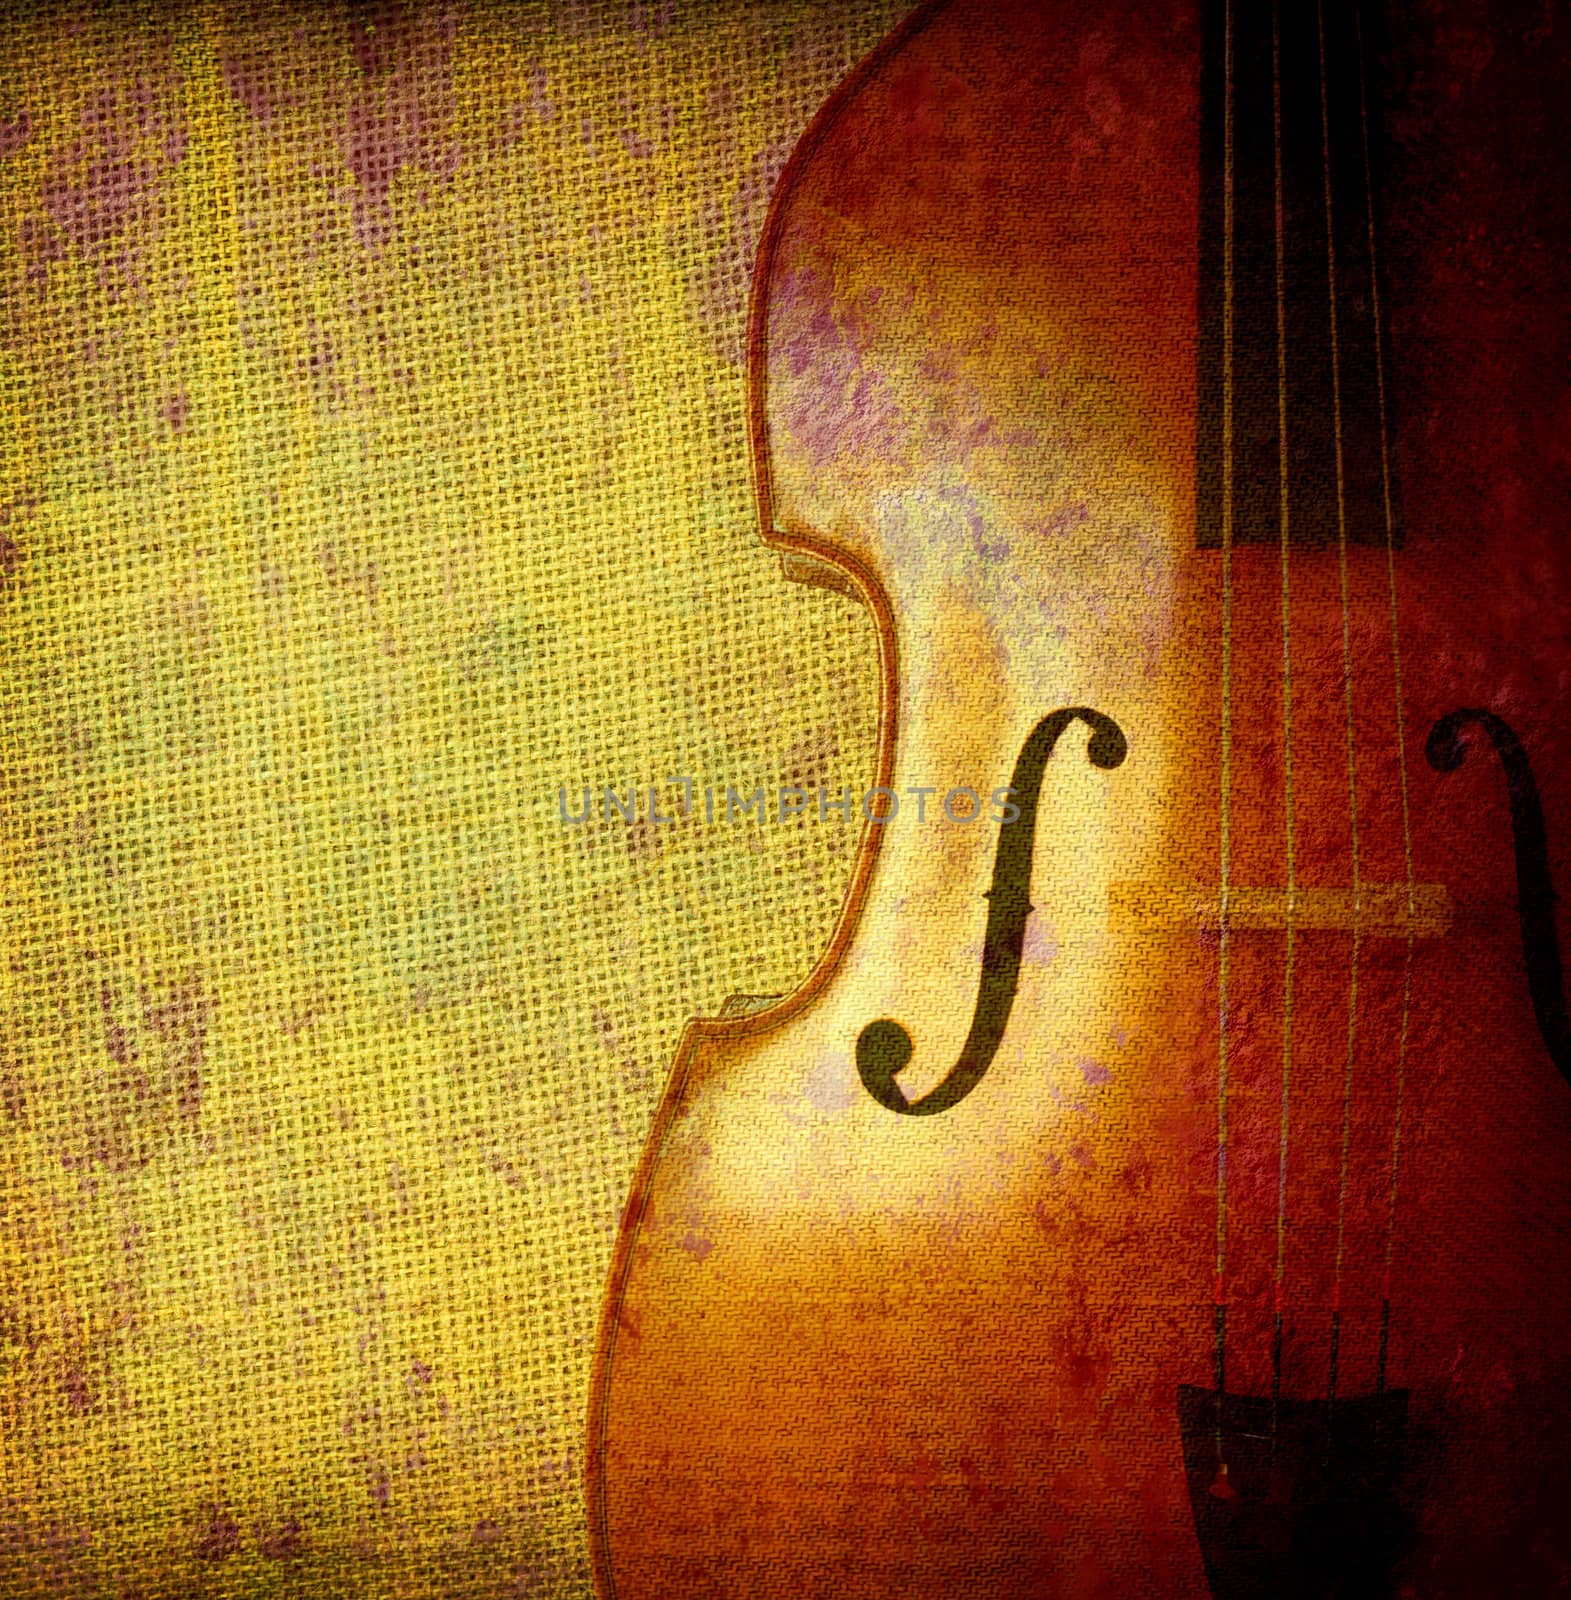 contrabass background copy space grunge style